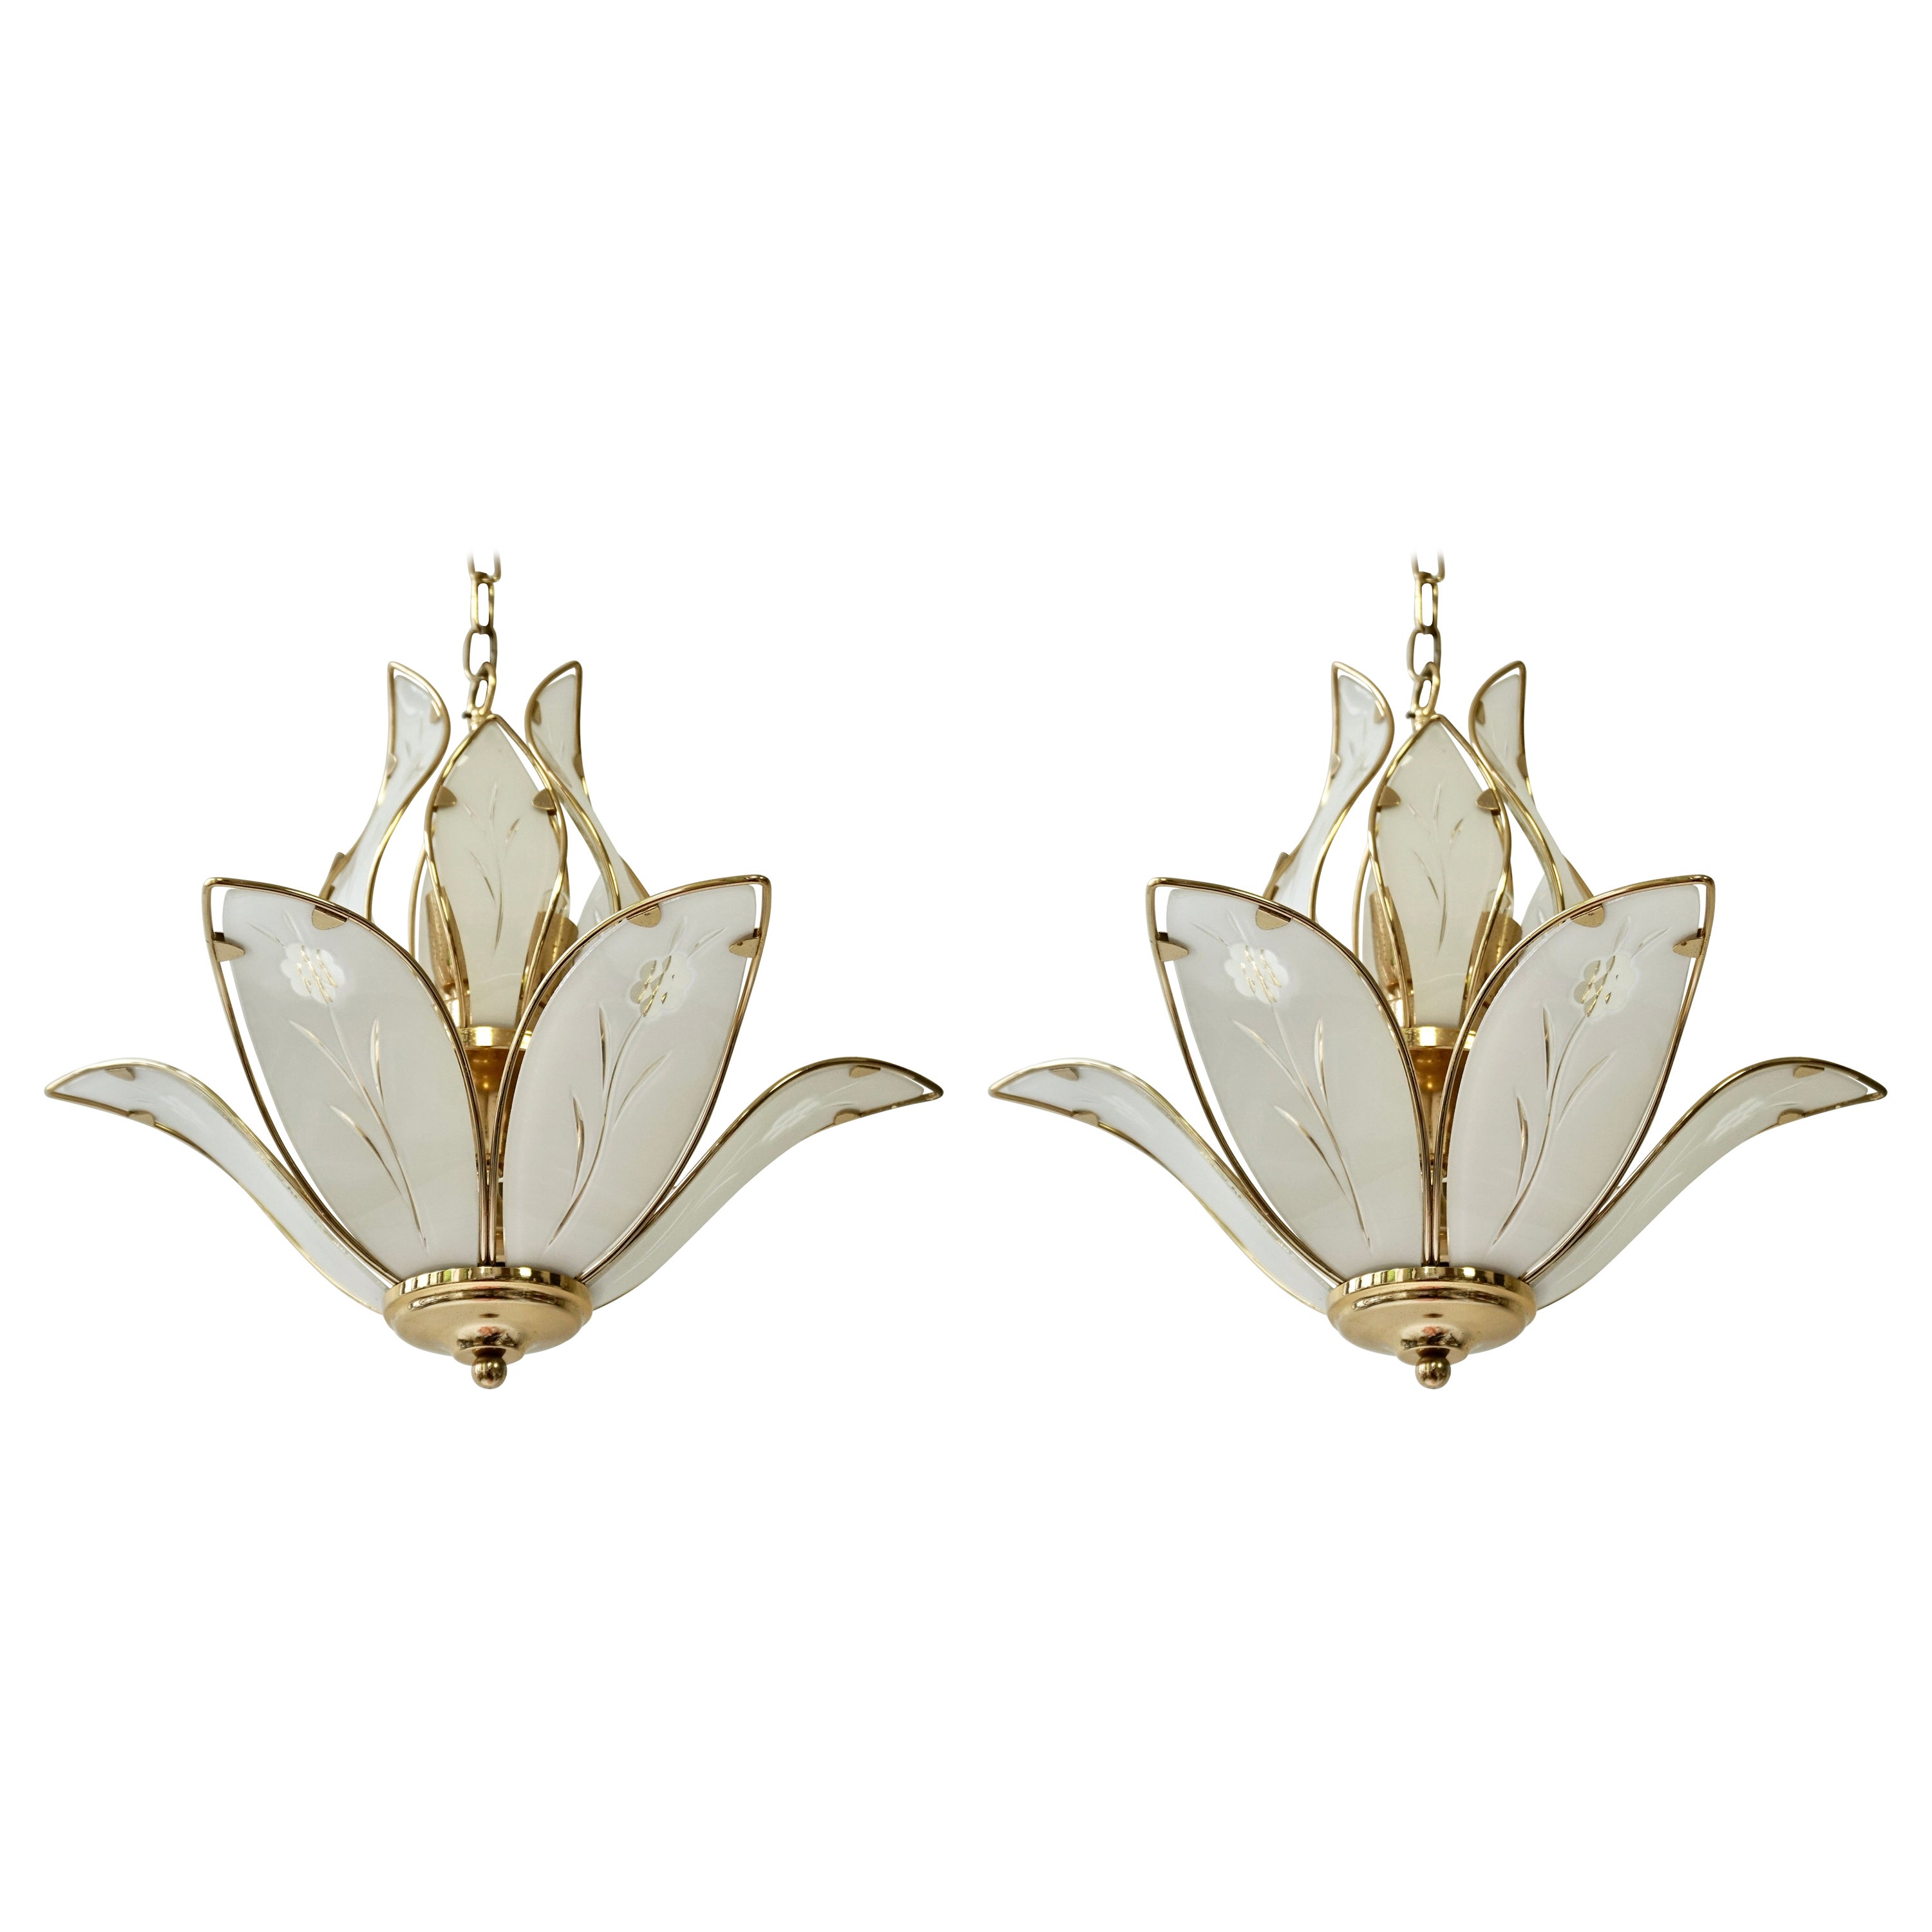 Three Lotus Flower and Brass Glass Chandeliers For Sale